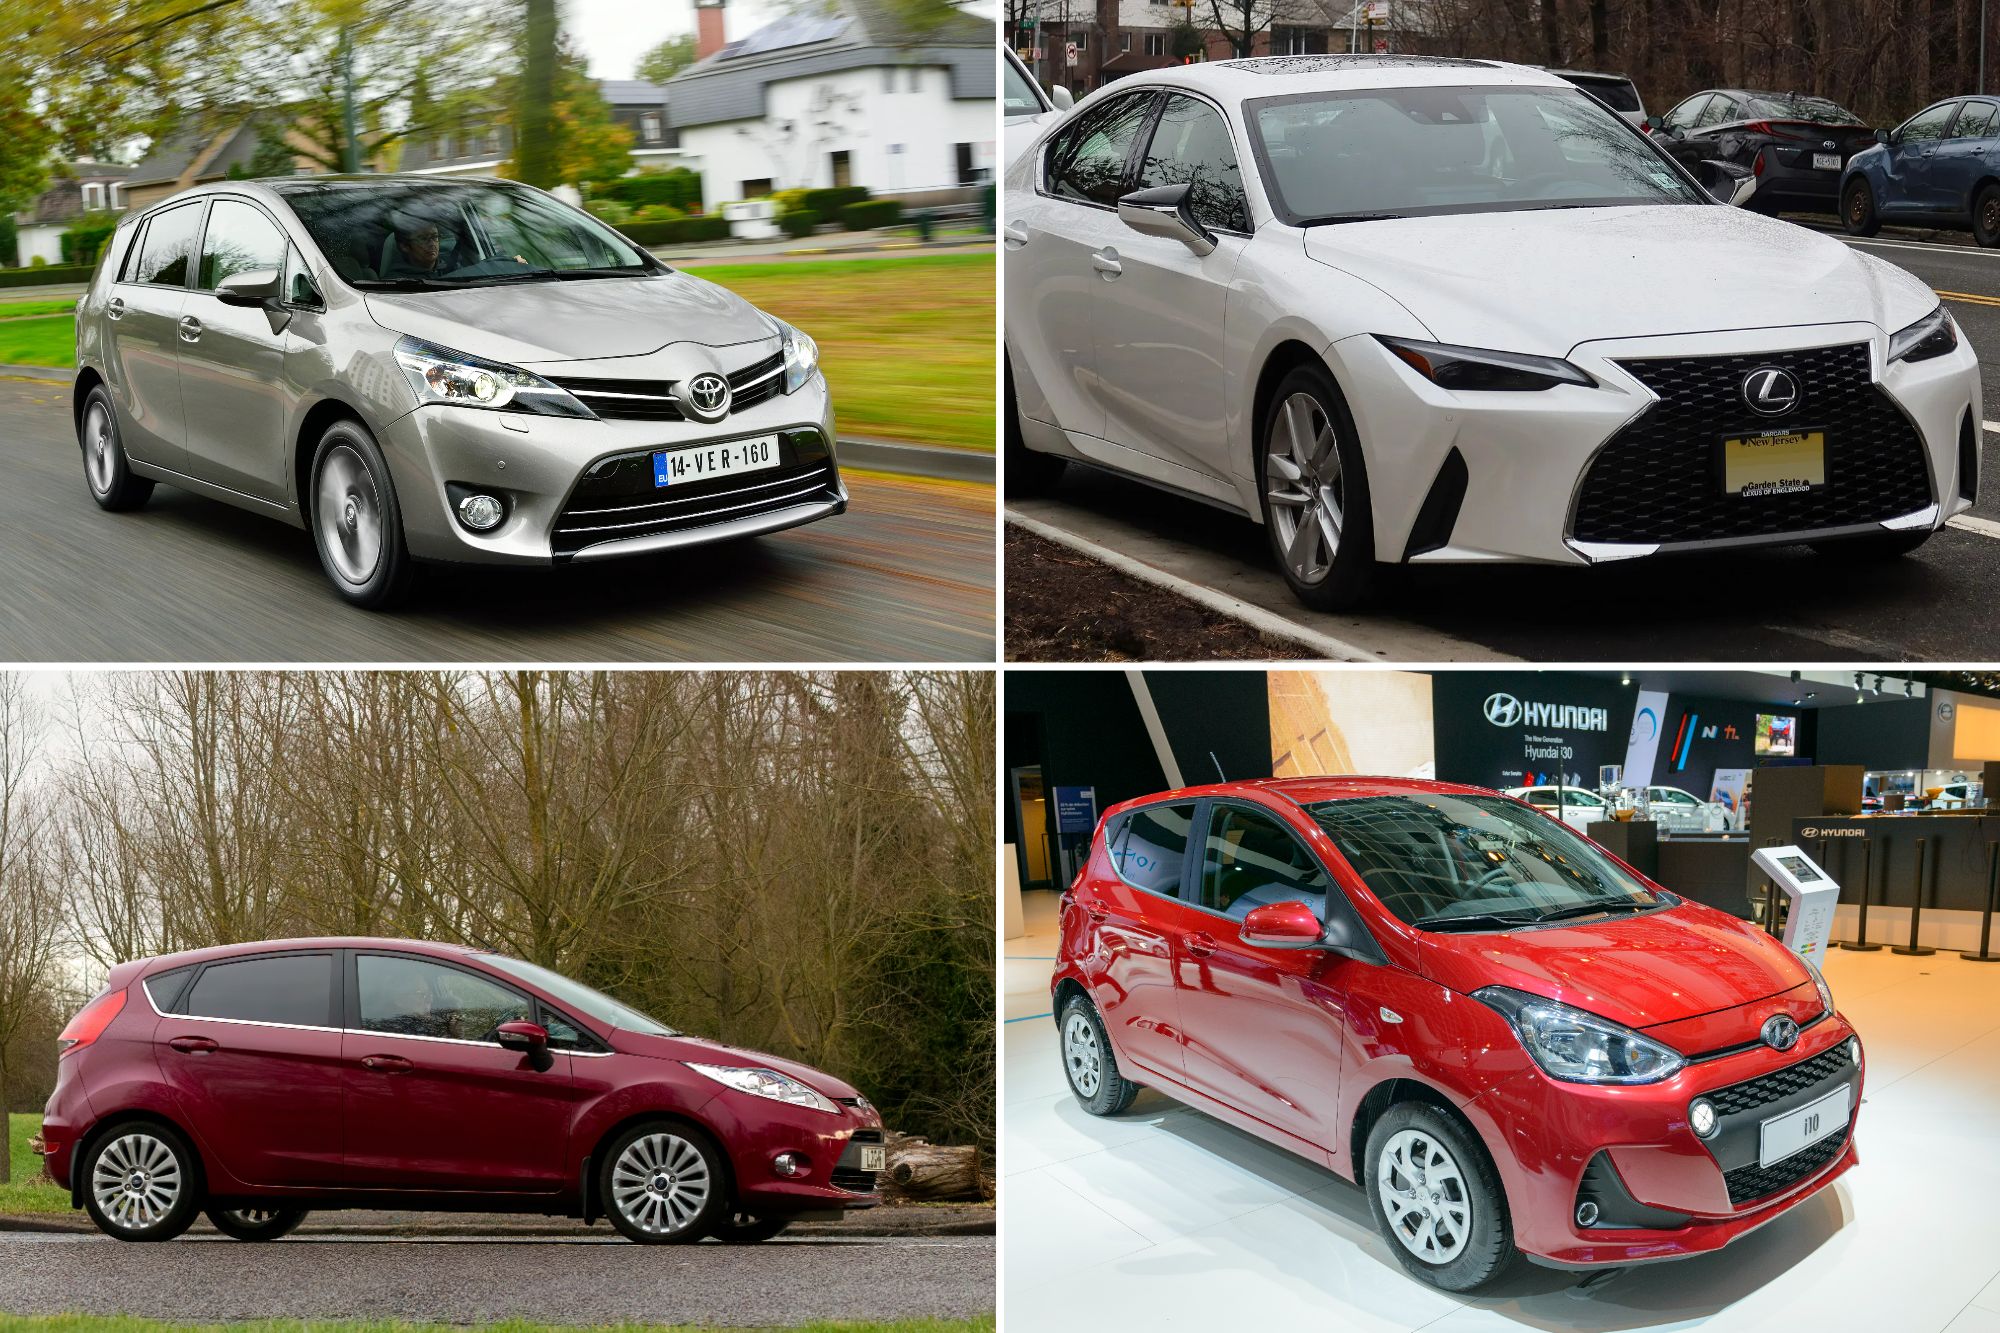 Car experts have revealed their favourite automatic cars for under £4,000